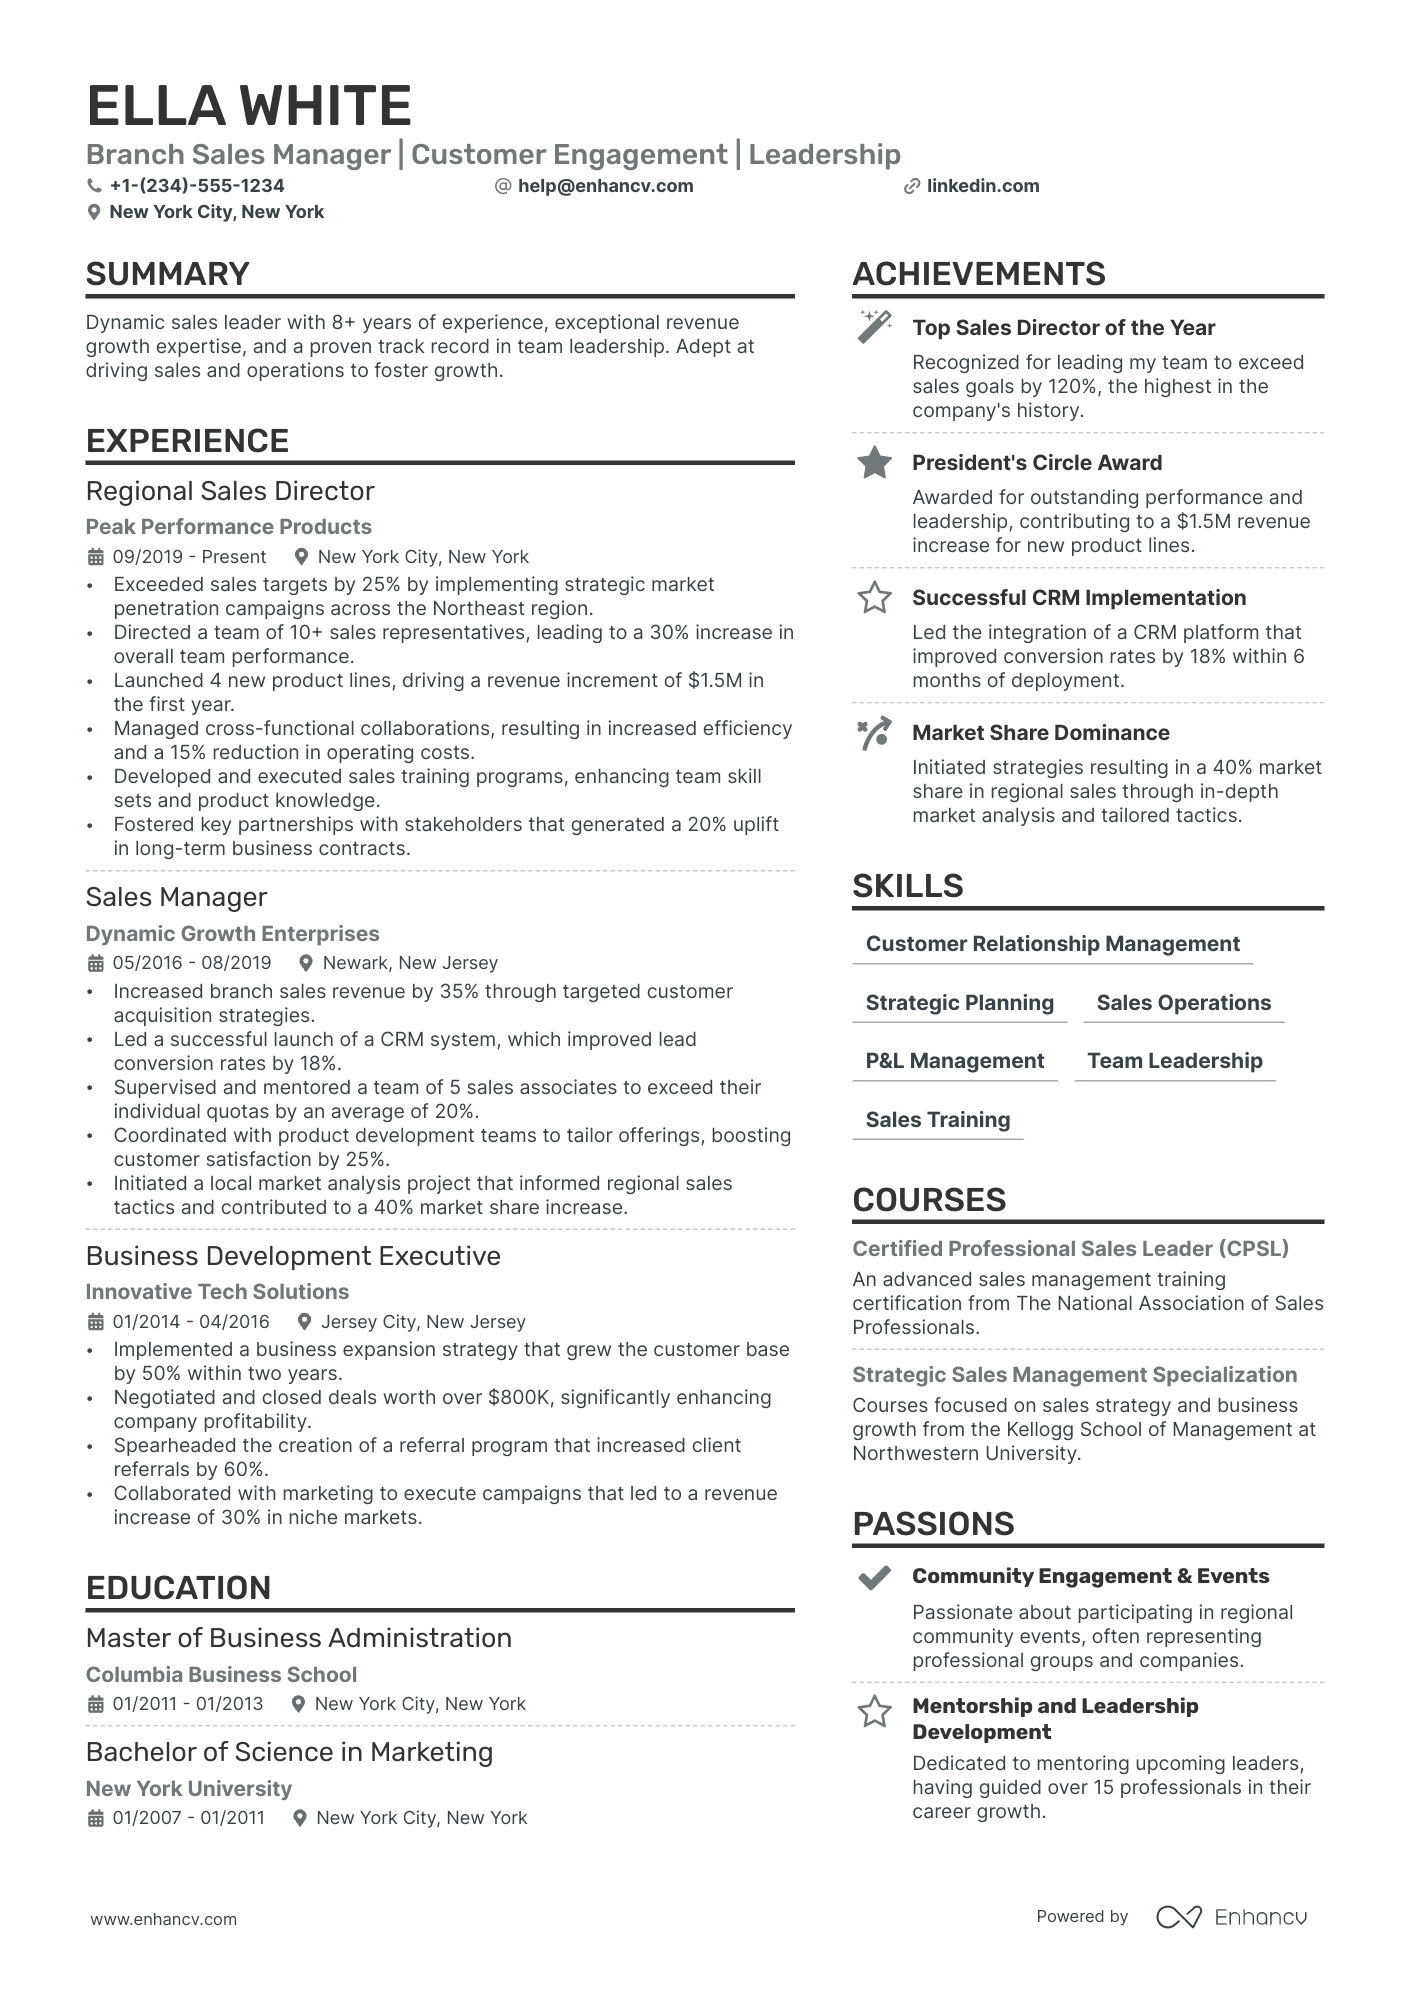 Branch Sales Manager resume example